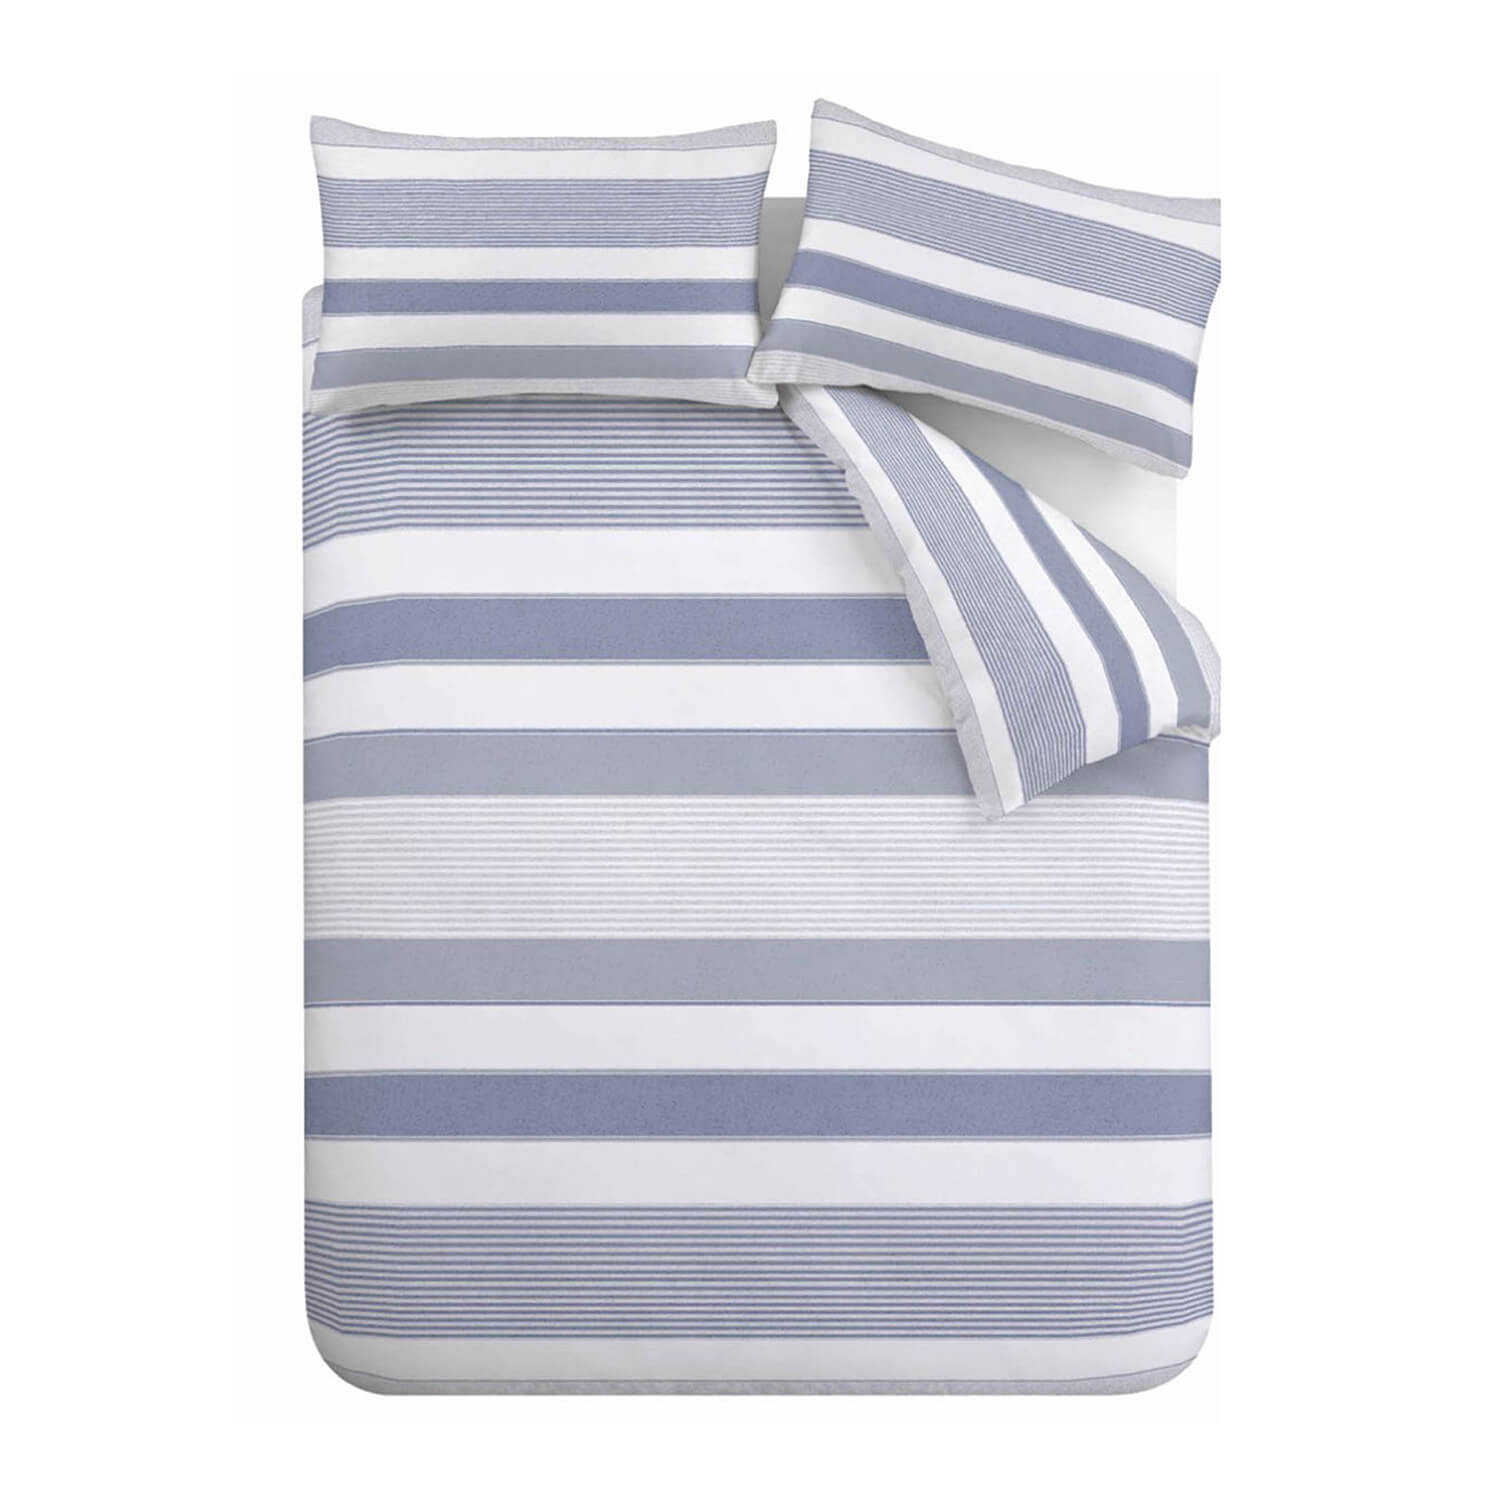  Catherine Lansfield Newquay Stripe Duvet Cover Set 2 Shaws Department Stores